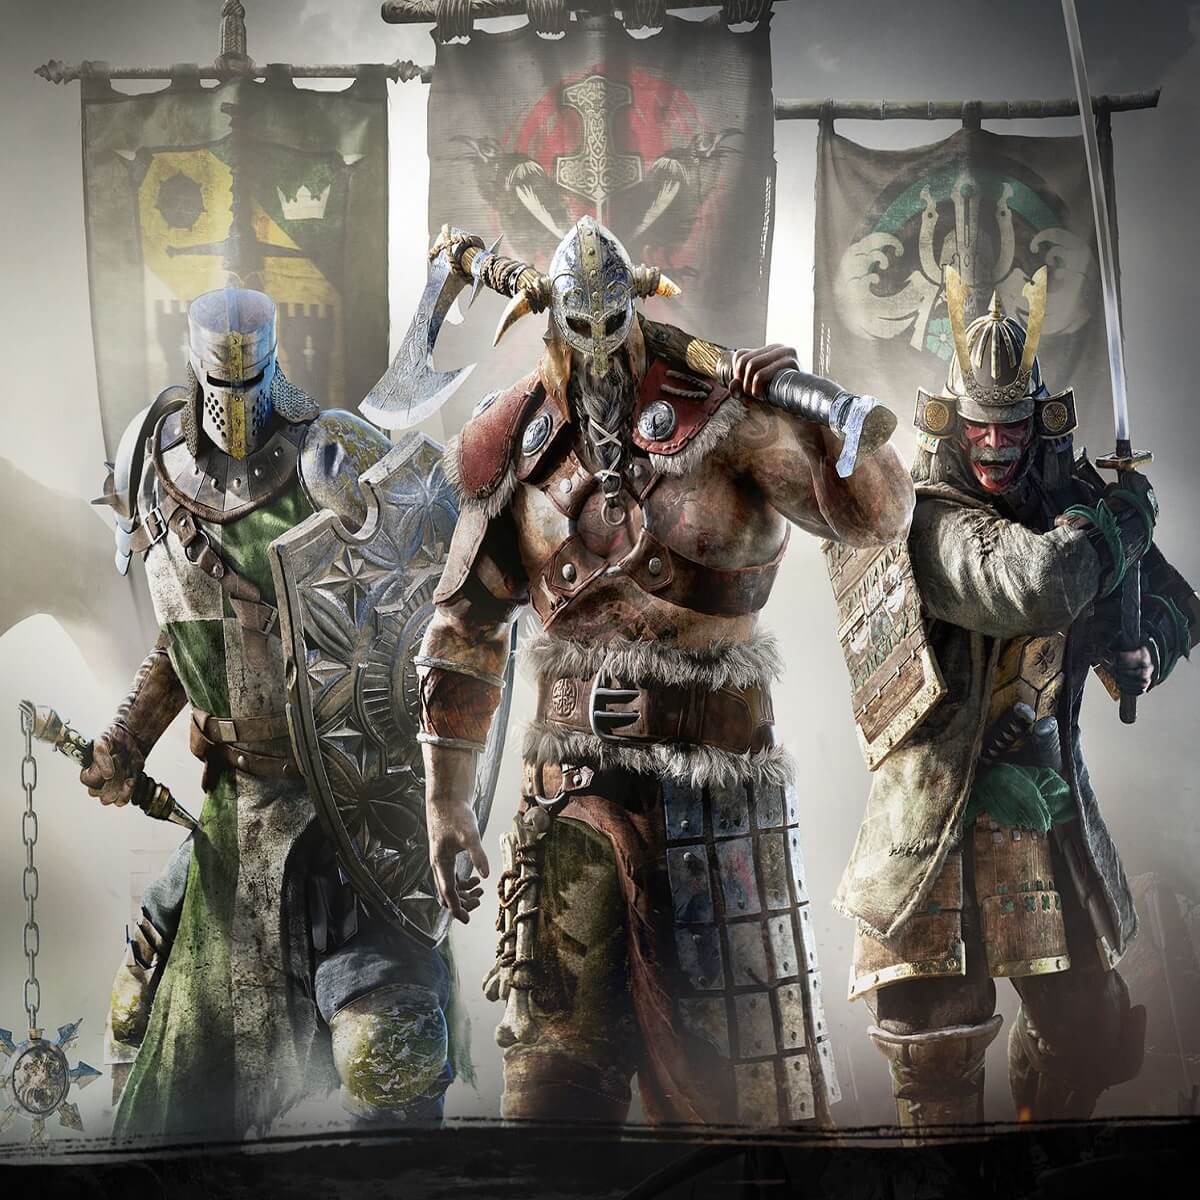 for honor cover